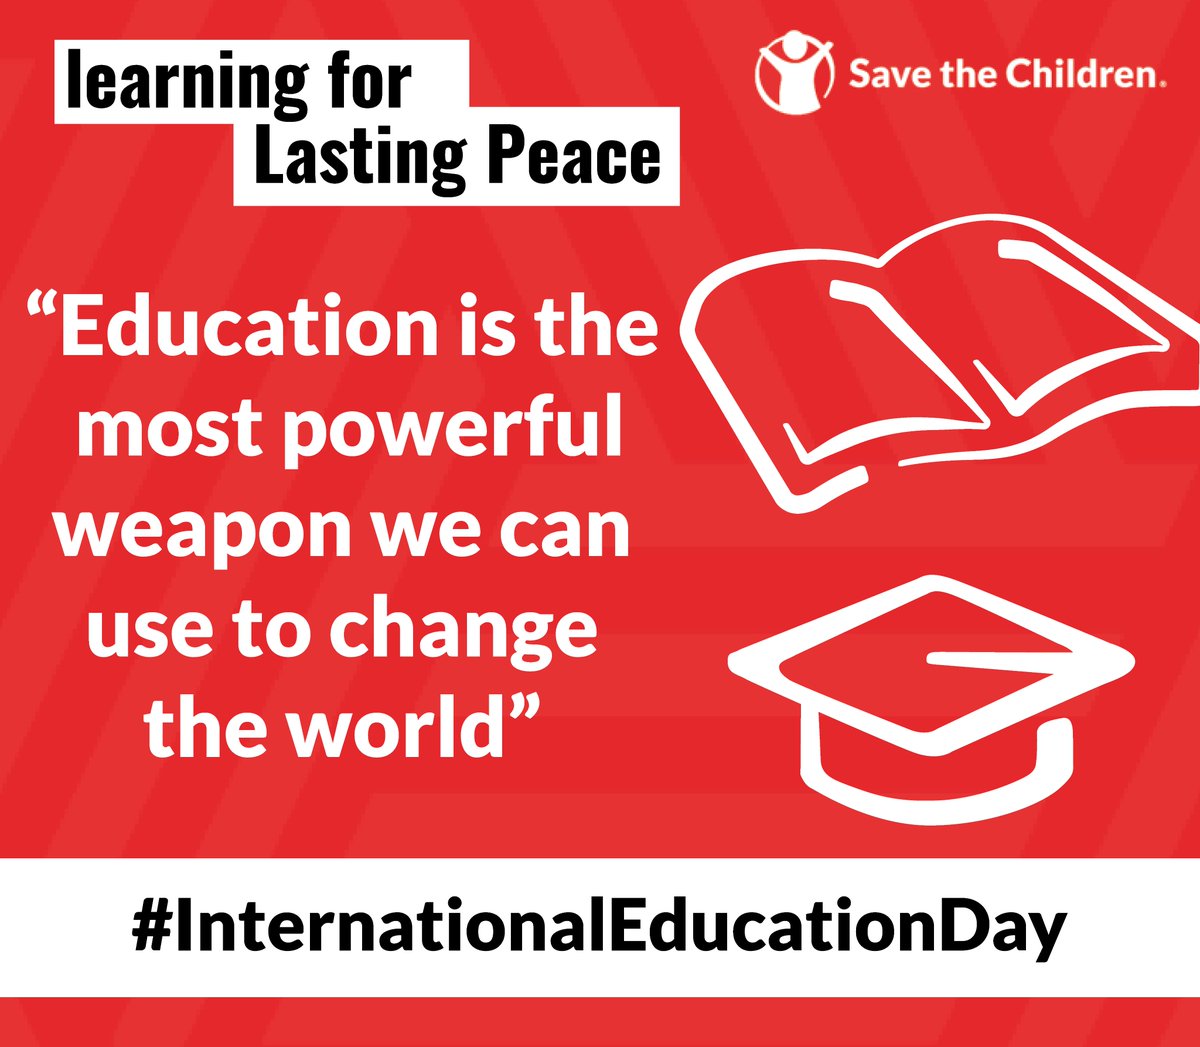 Learning for lasting peace in #SouthSudan. Education is the most powerful weapon we can use to change the world. #InternationalEducationDay #EducationDay